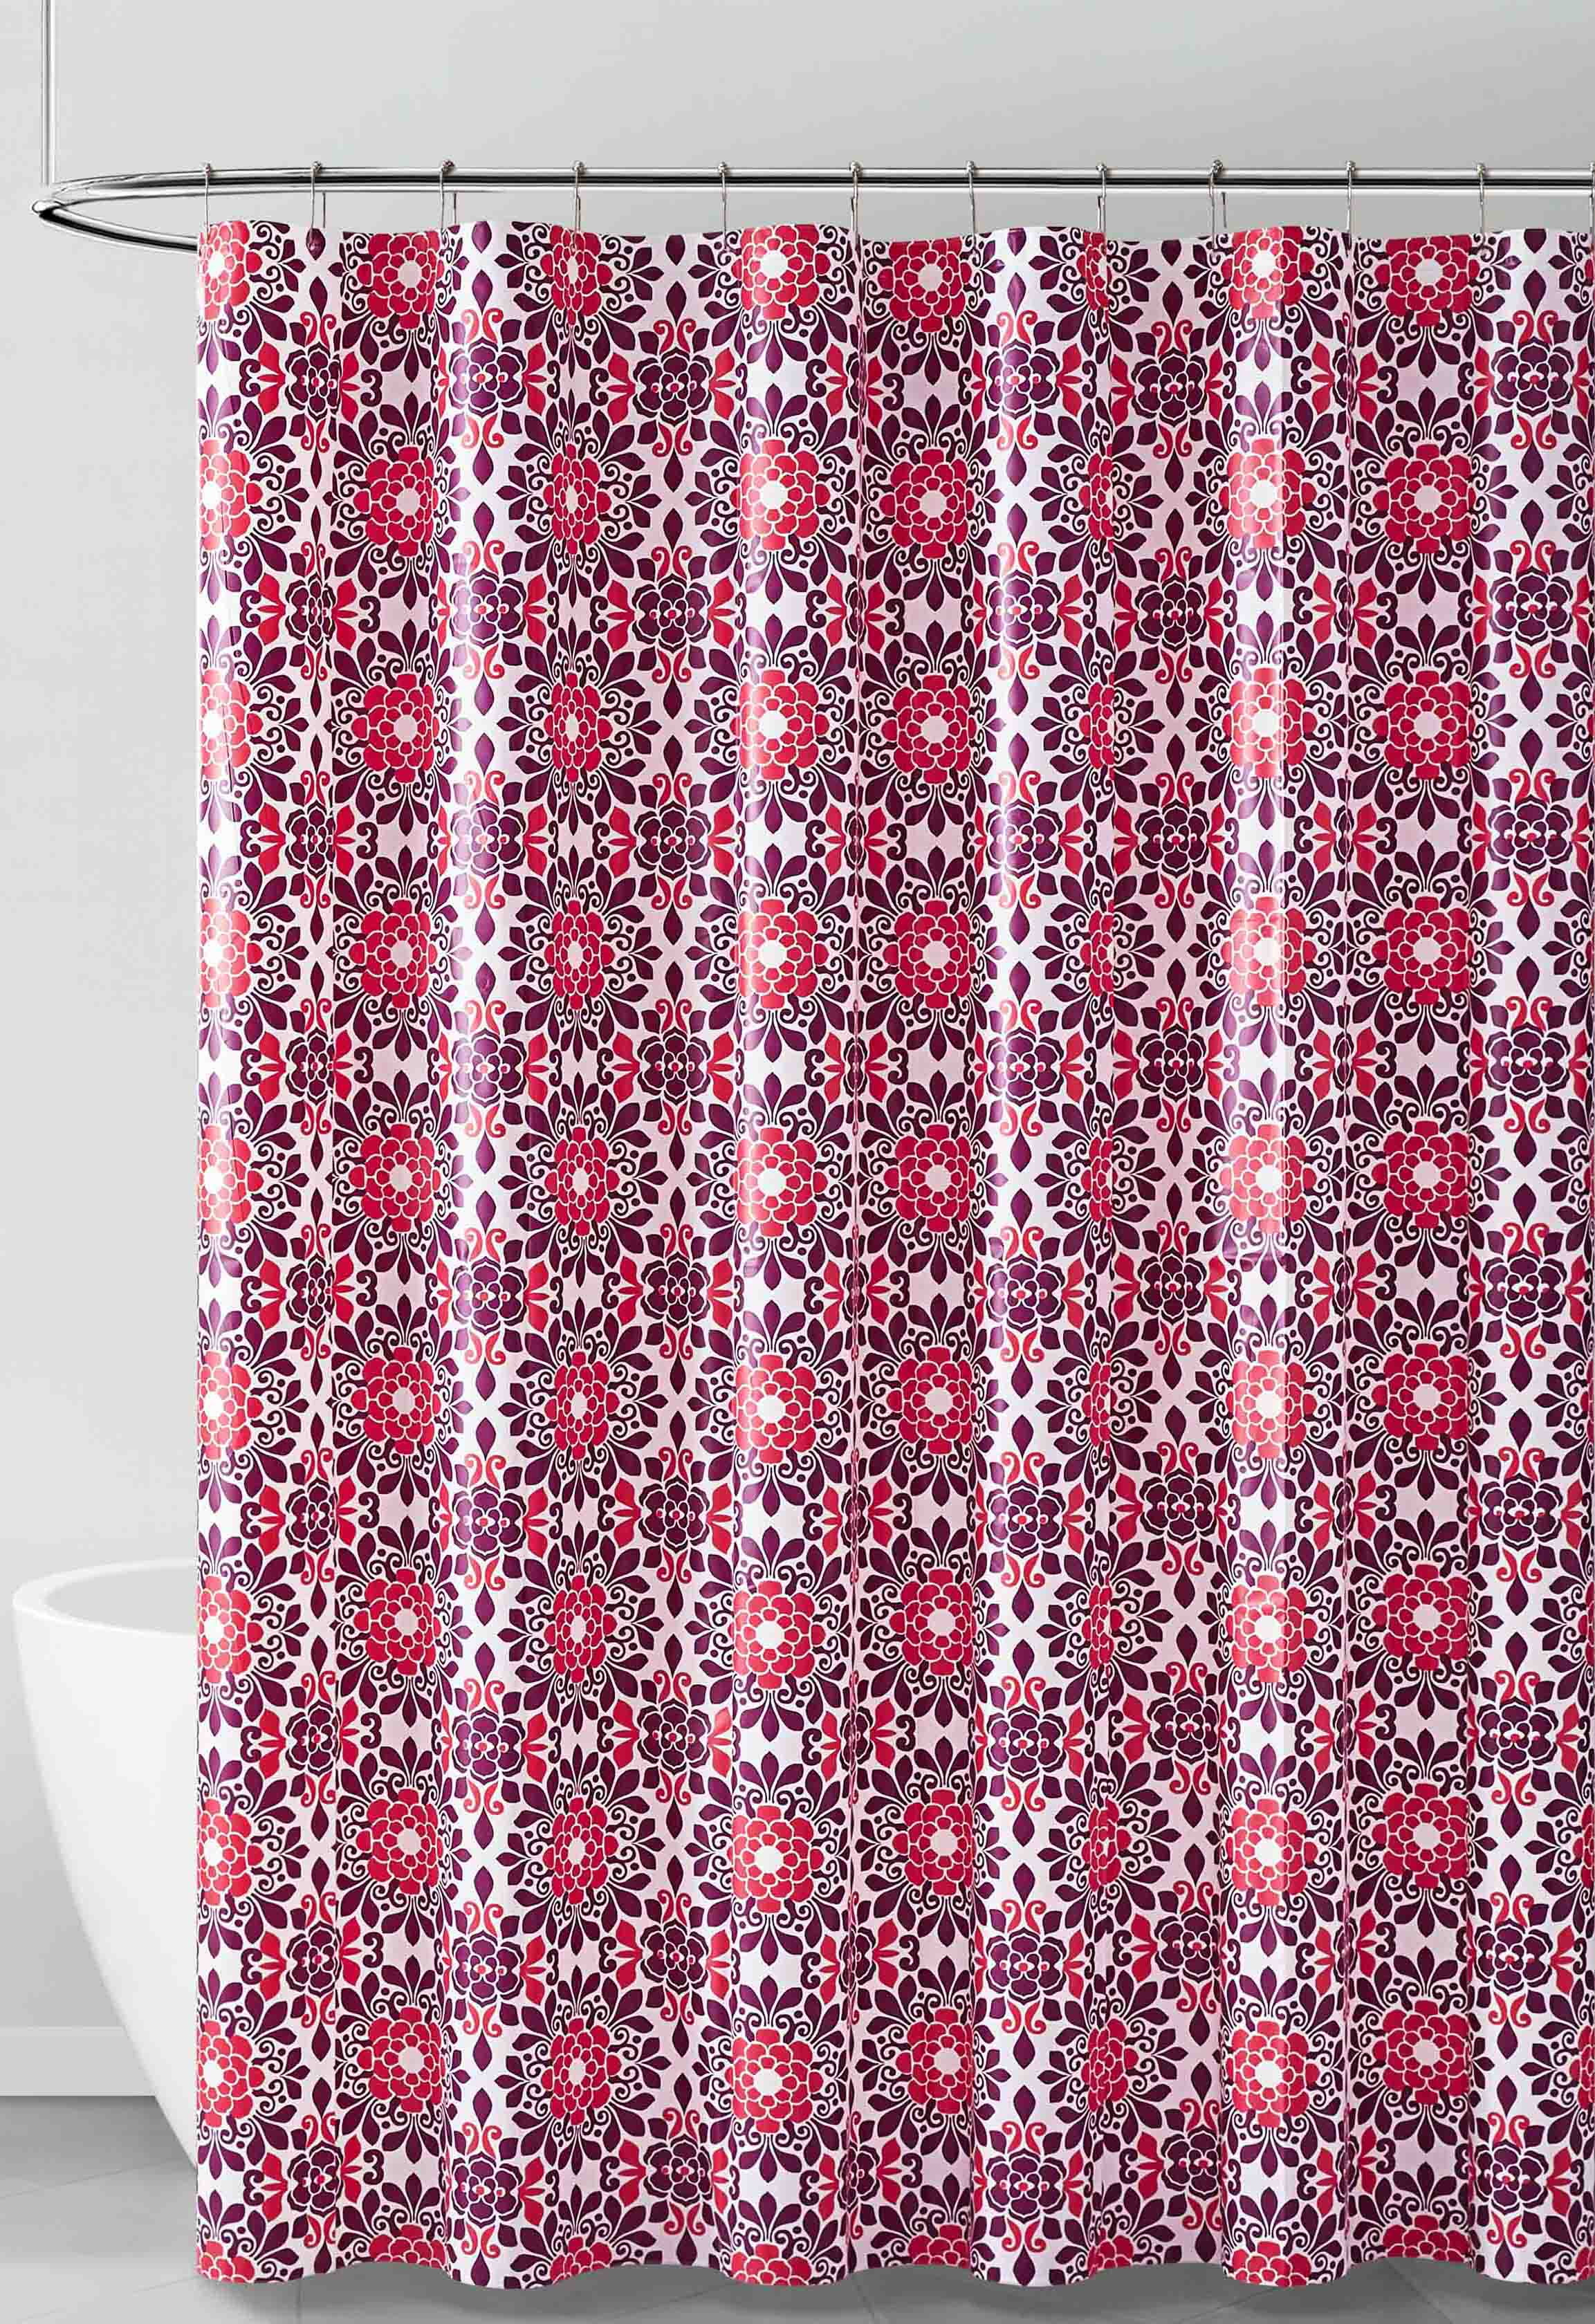 Fresh purple and red shower curtain Red Purple And White Medallion Design Peva Shower Curtain Liner Odorless Pvc Chlorine Free Biodegradable Mildew Eco Friendly Size 72in X 72inred Walmart Com